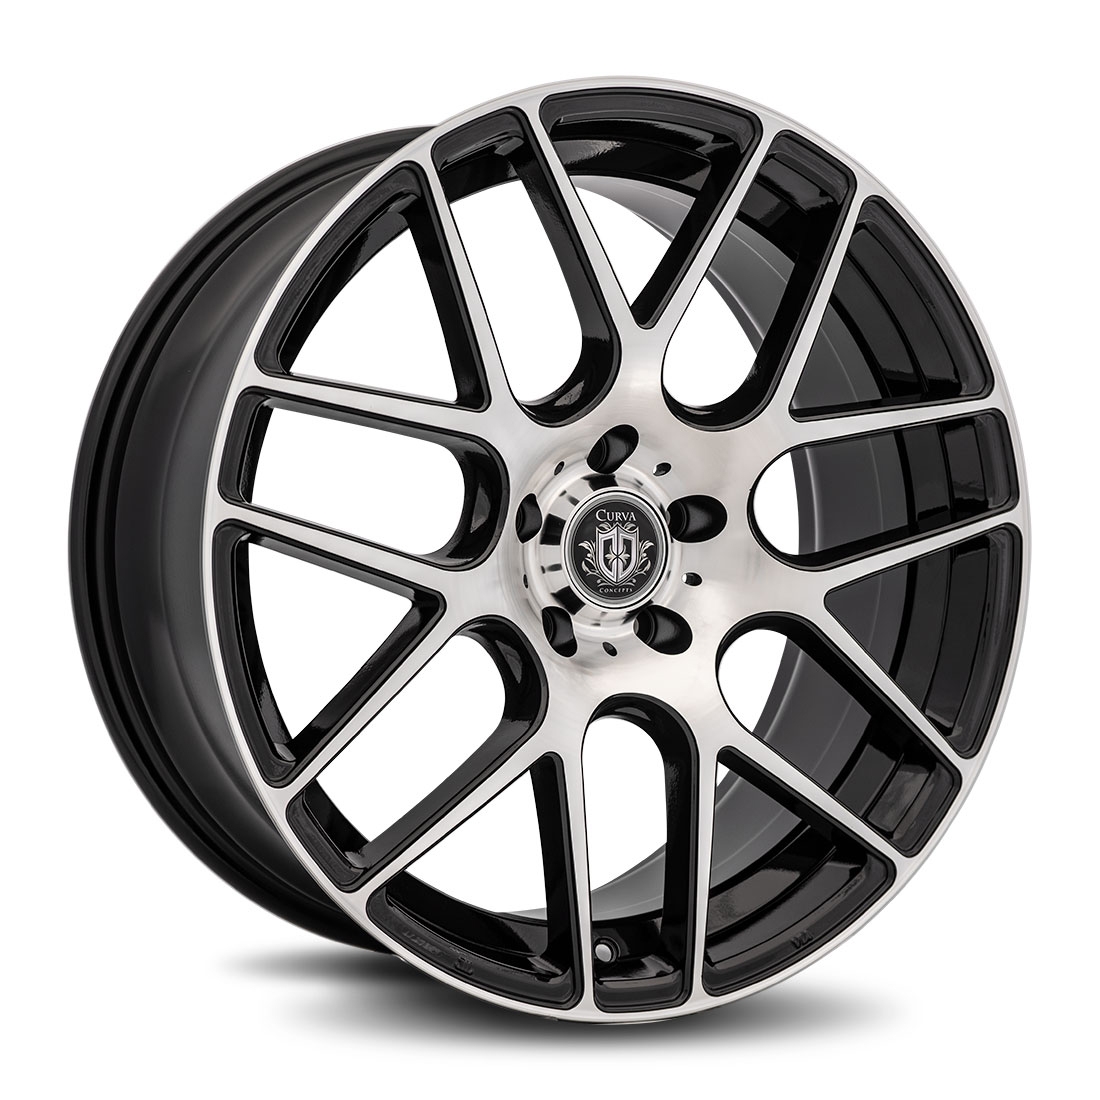 Curva Concepts C7 Aftermarket Wheels 20 Inch Black Machined Face